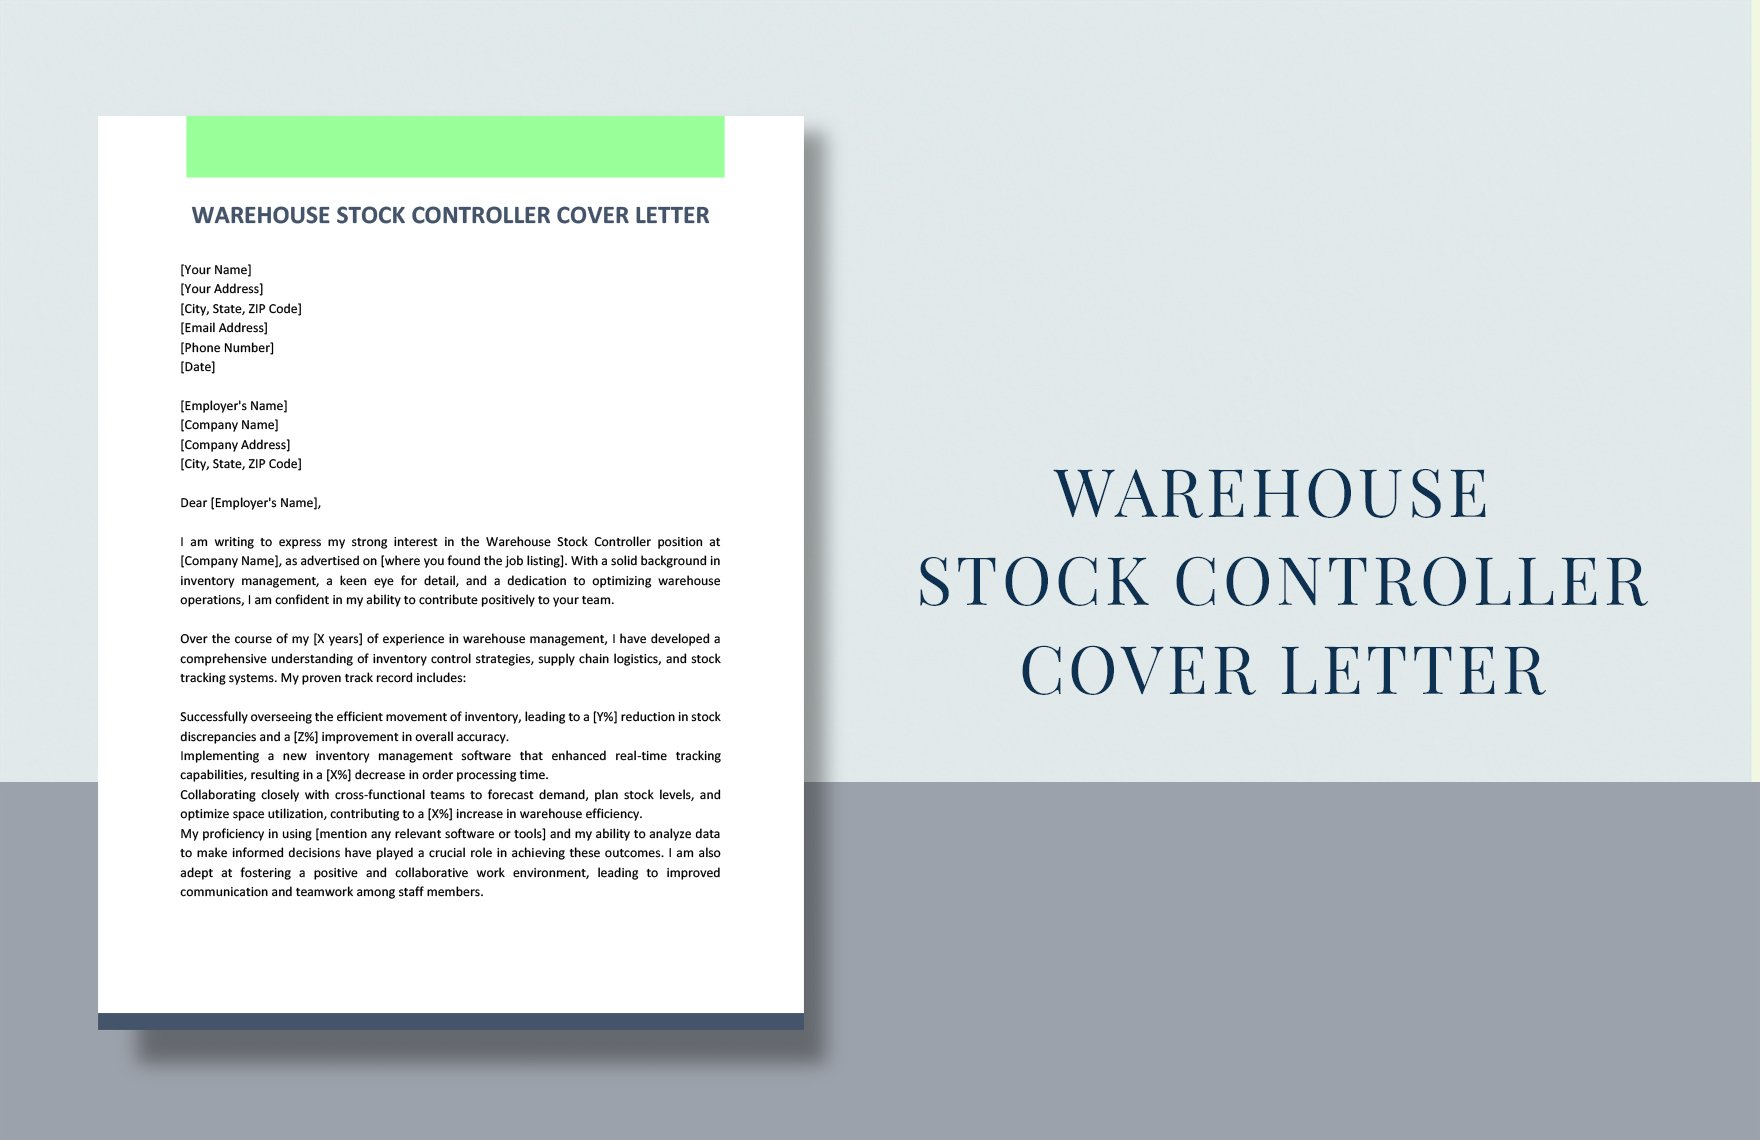 Warehouse Stock Controller Cover Letter